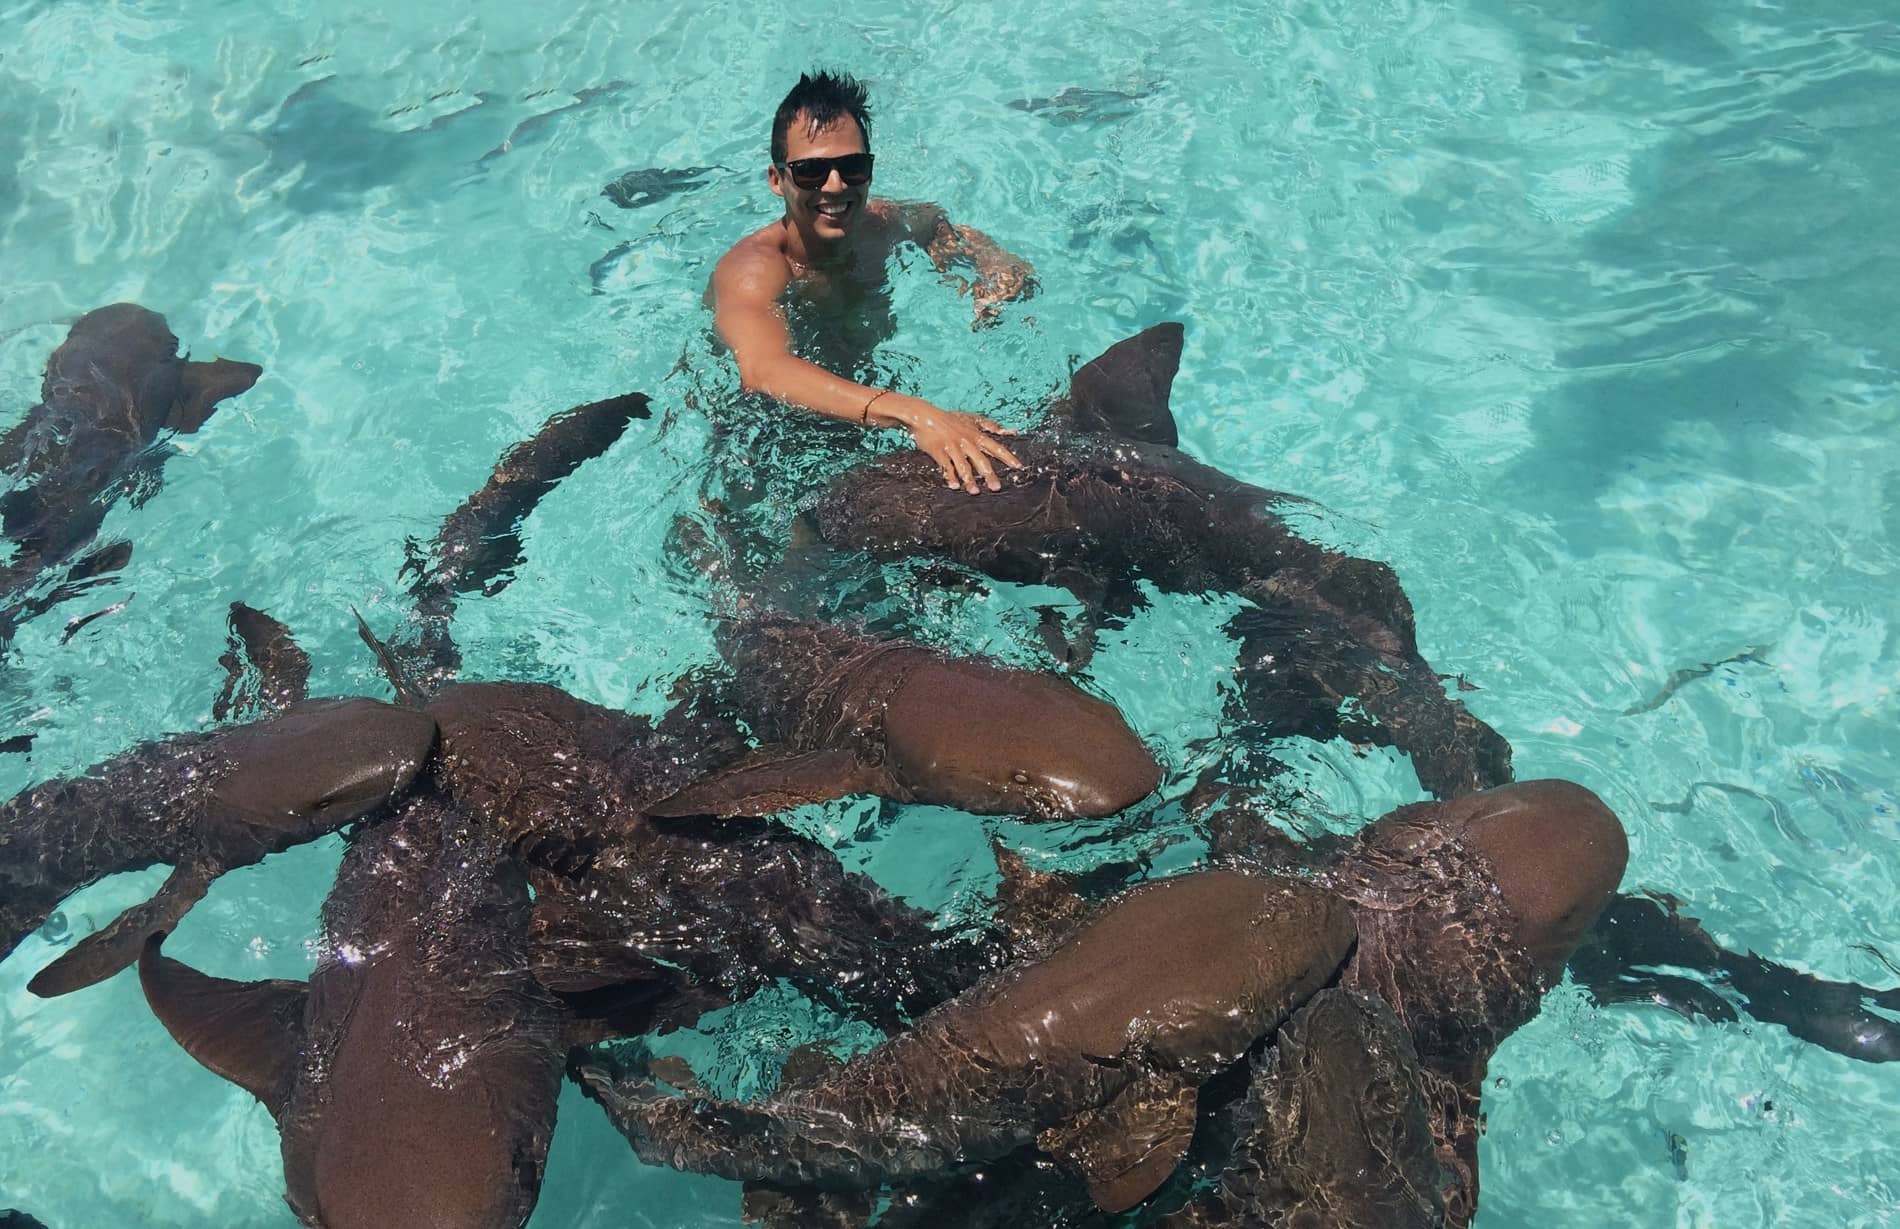 Swimming with sharks in the Bahamas 7continents1passport